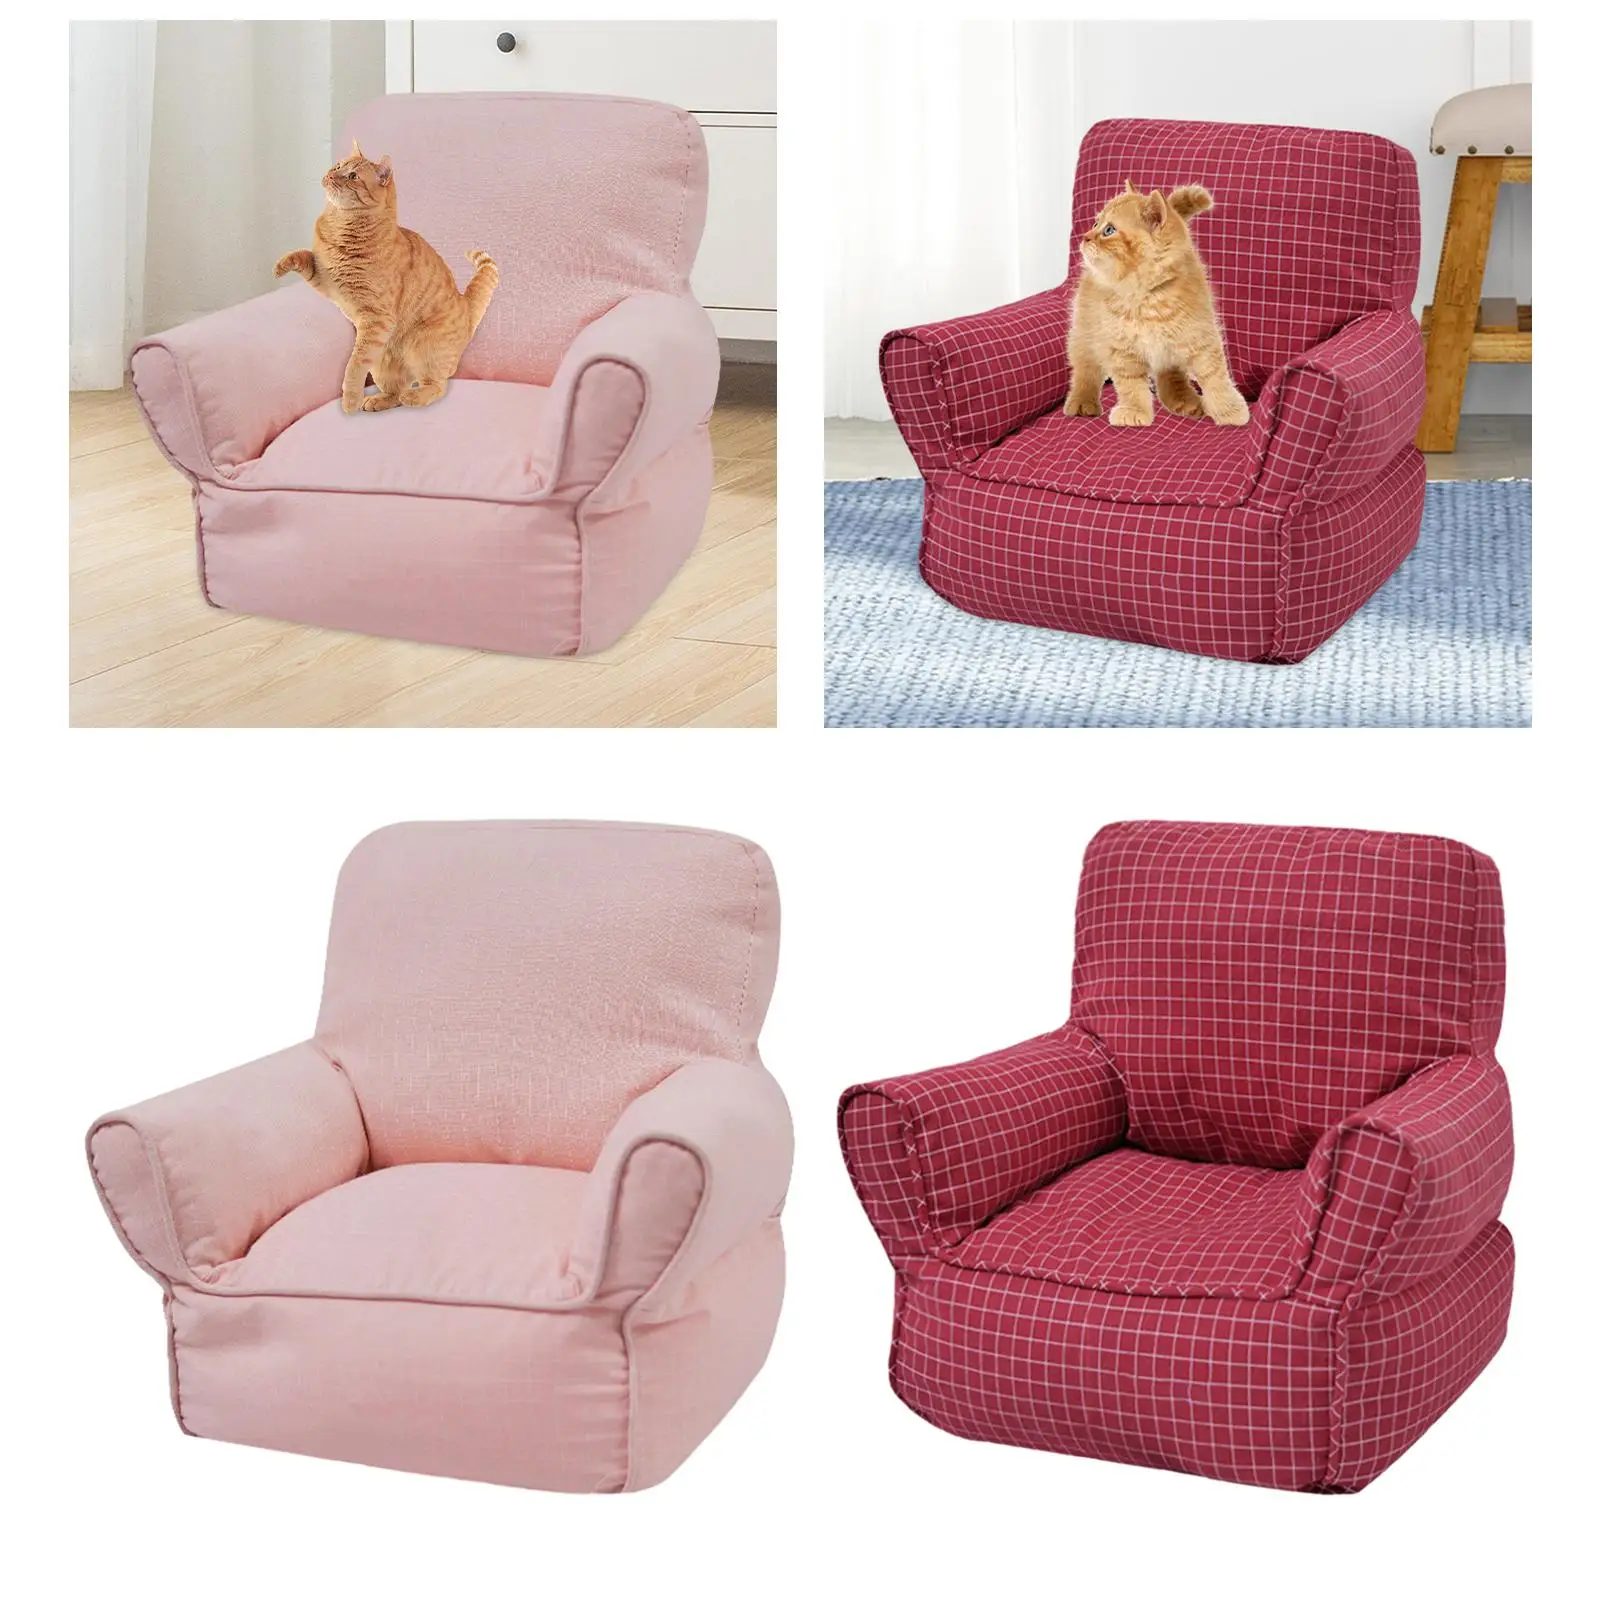 Cat Sofa Bed Portable Home Decor Indoor Cats Modern Sofa Pet Couch Bed Cat Condo for Sleeping Puppy Resting Doggy Small Animals